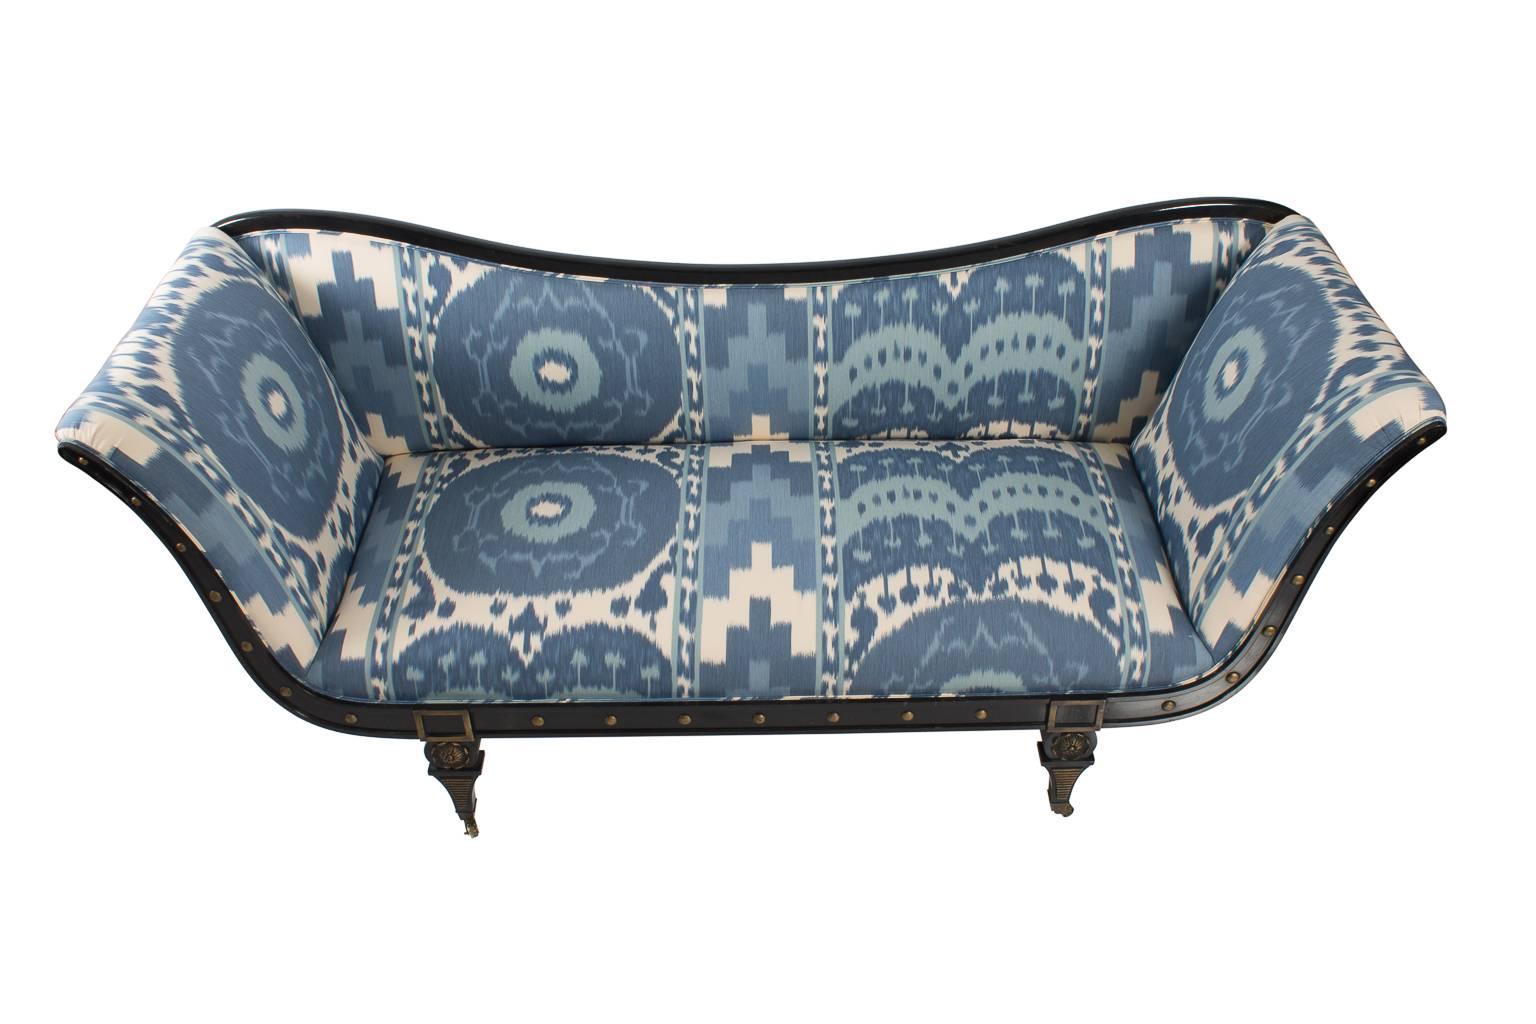 Hollywood Regency style sofa with an ebonized frame and ikat inspired fabric.